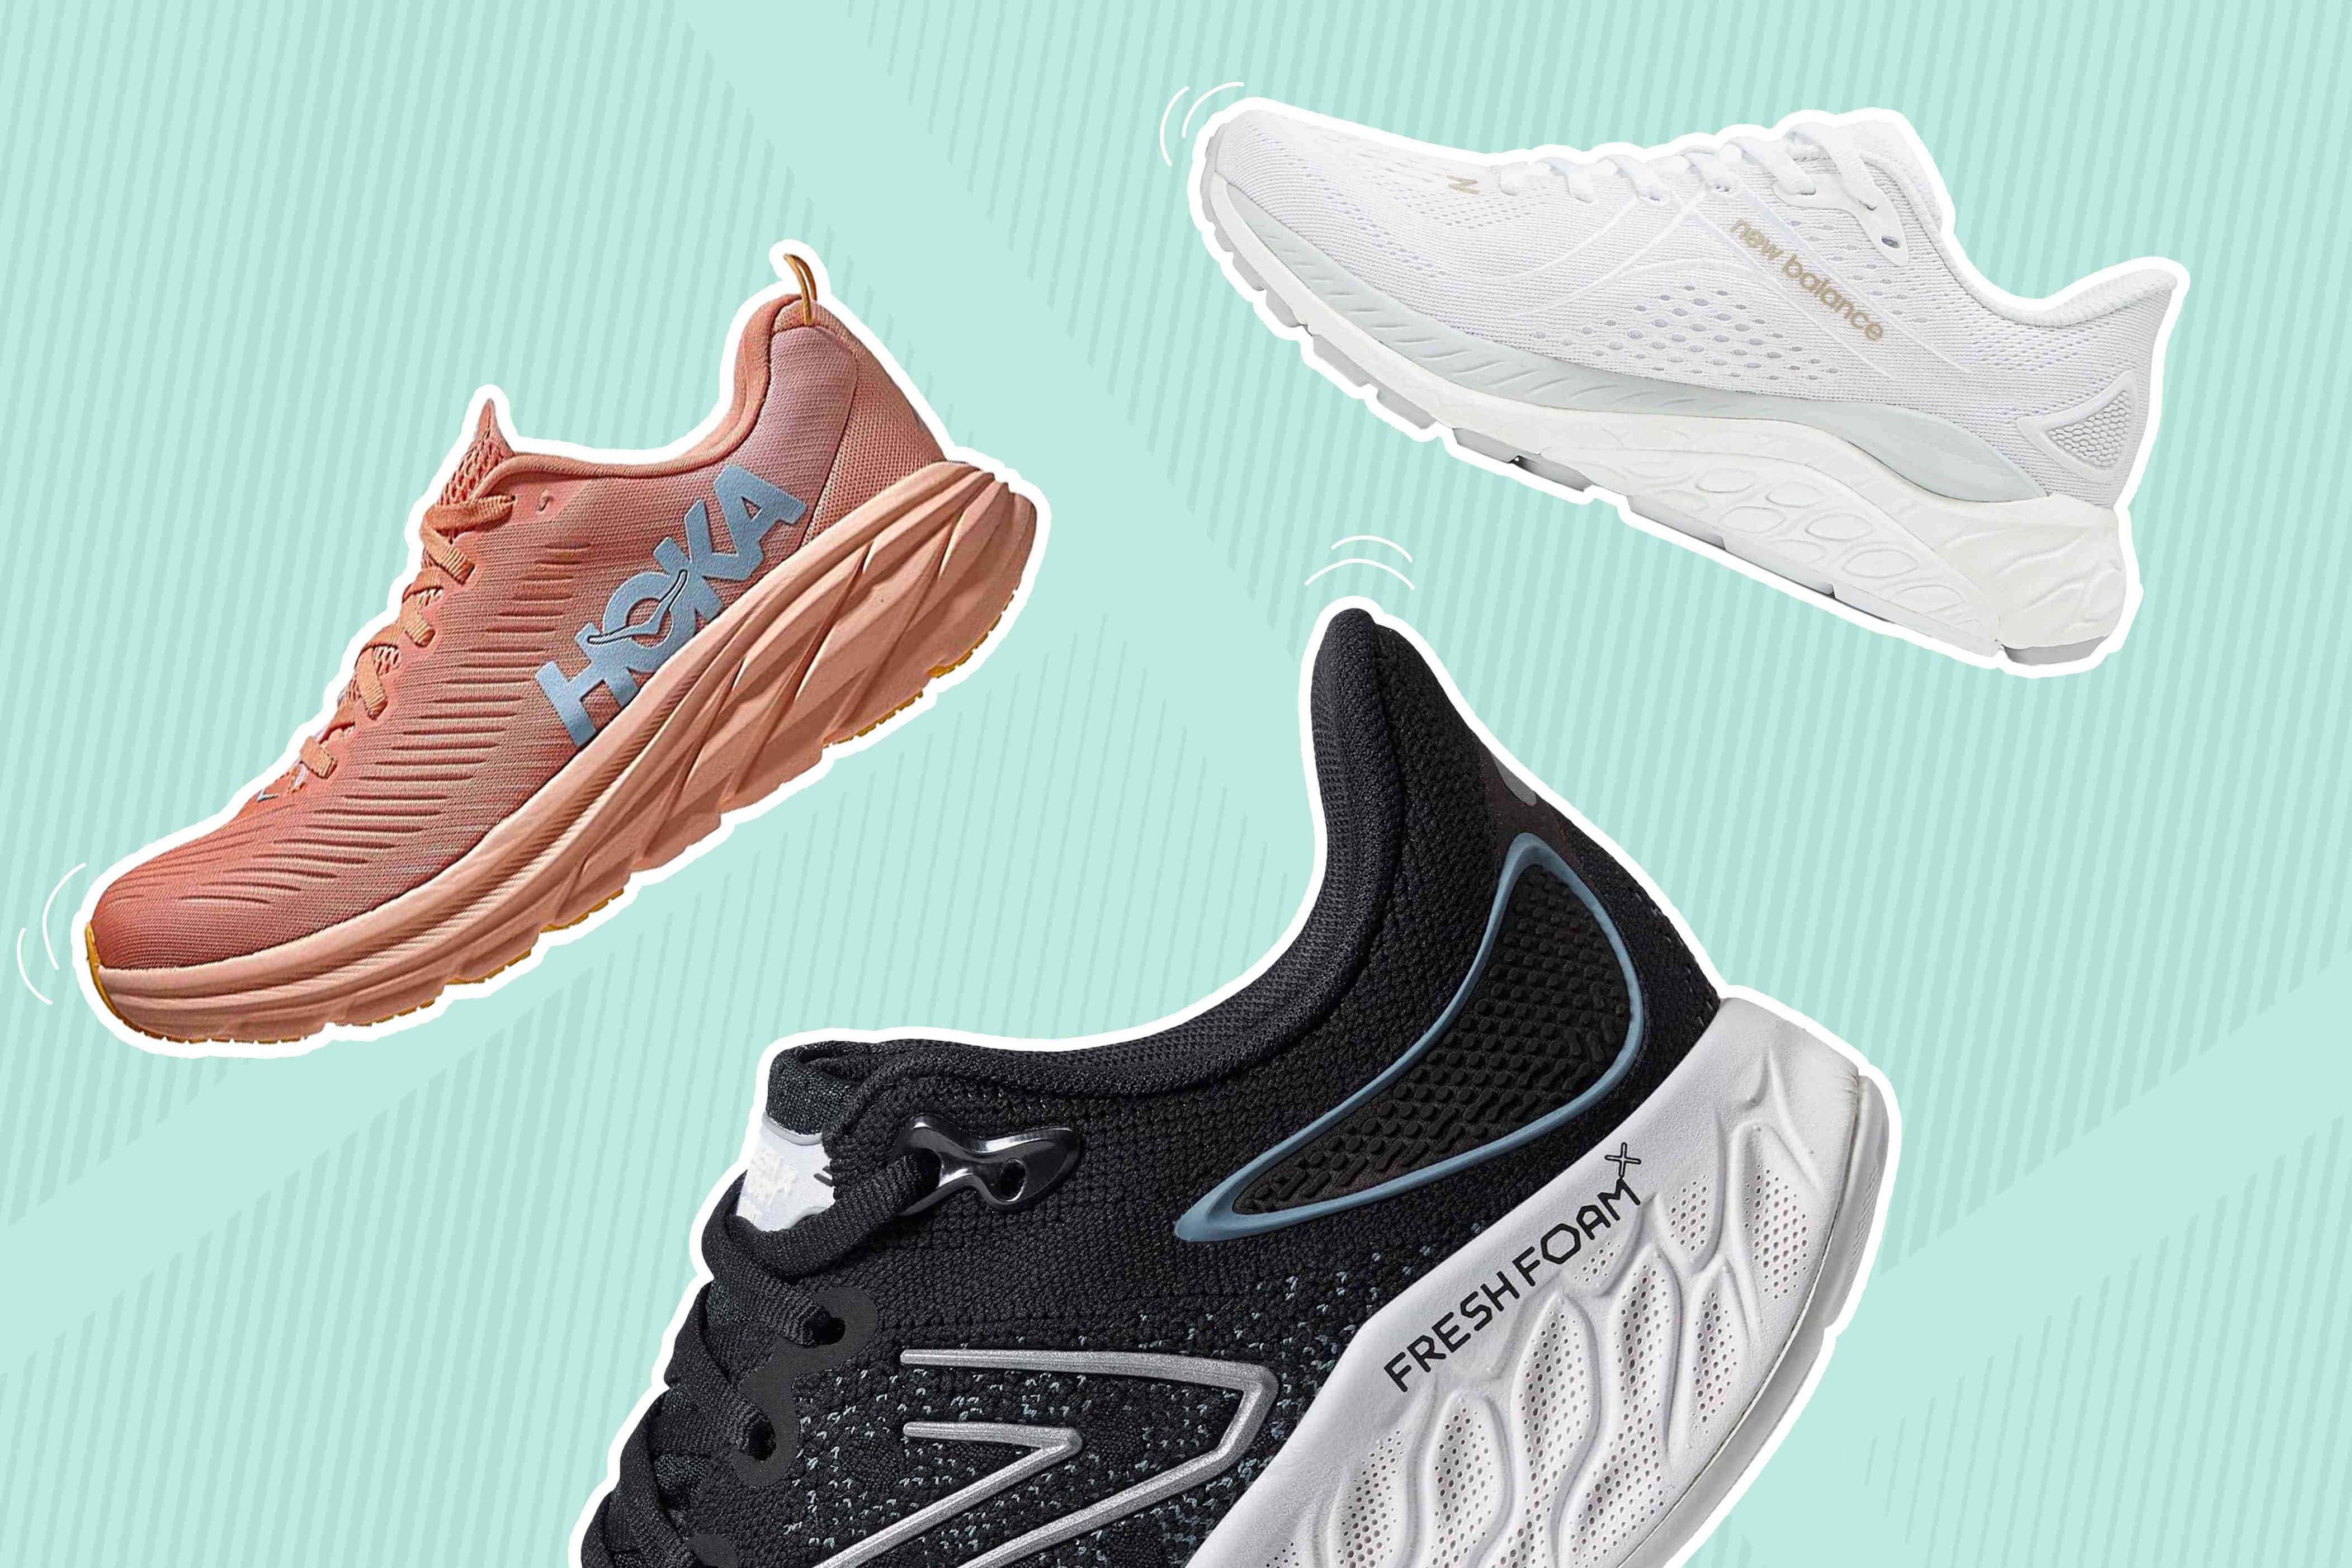 The 10 Best Running Shoes for Wide Feet for Comfortable, Pain-Free Runs